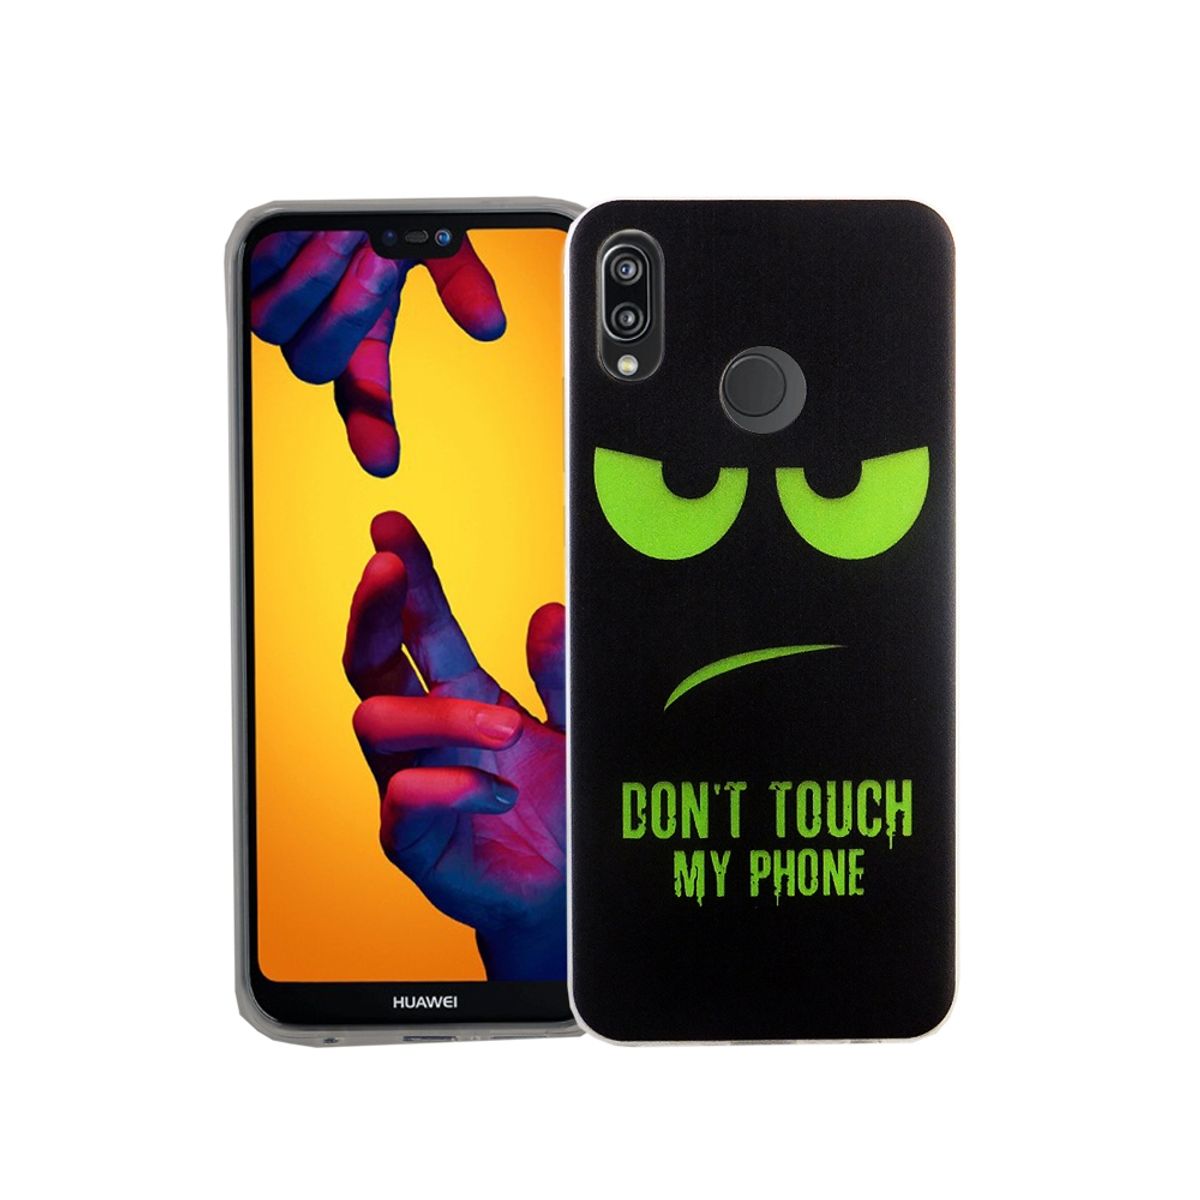 Dont Touch My Handy Case Handyhülle Huawei P20 Lite Silikon